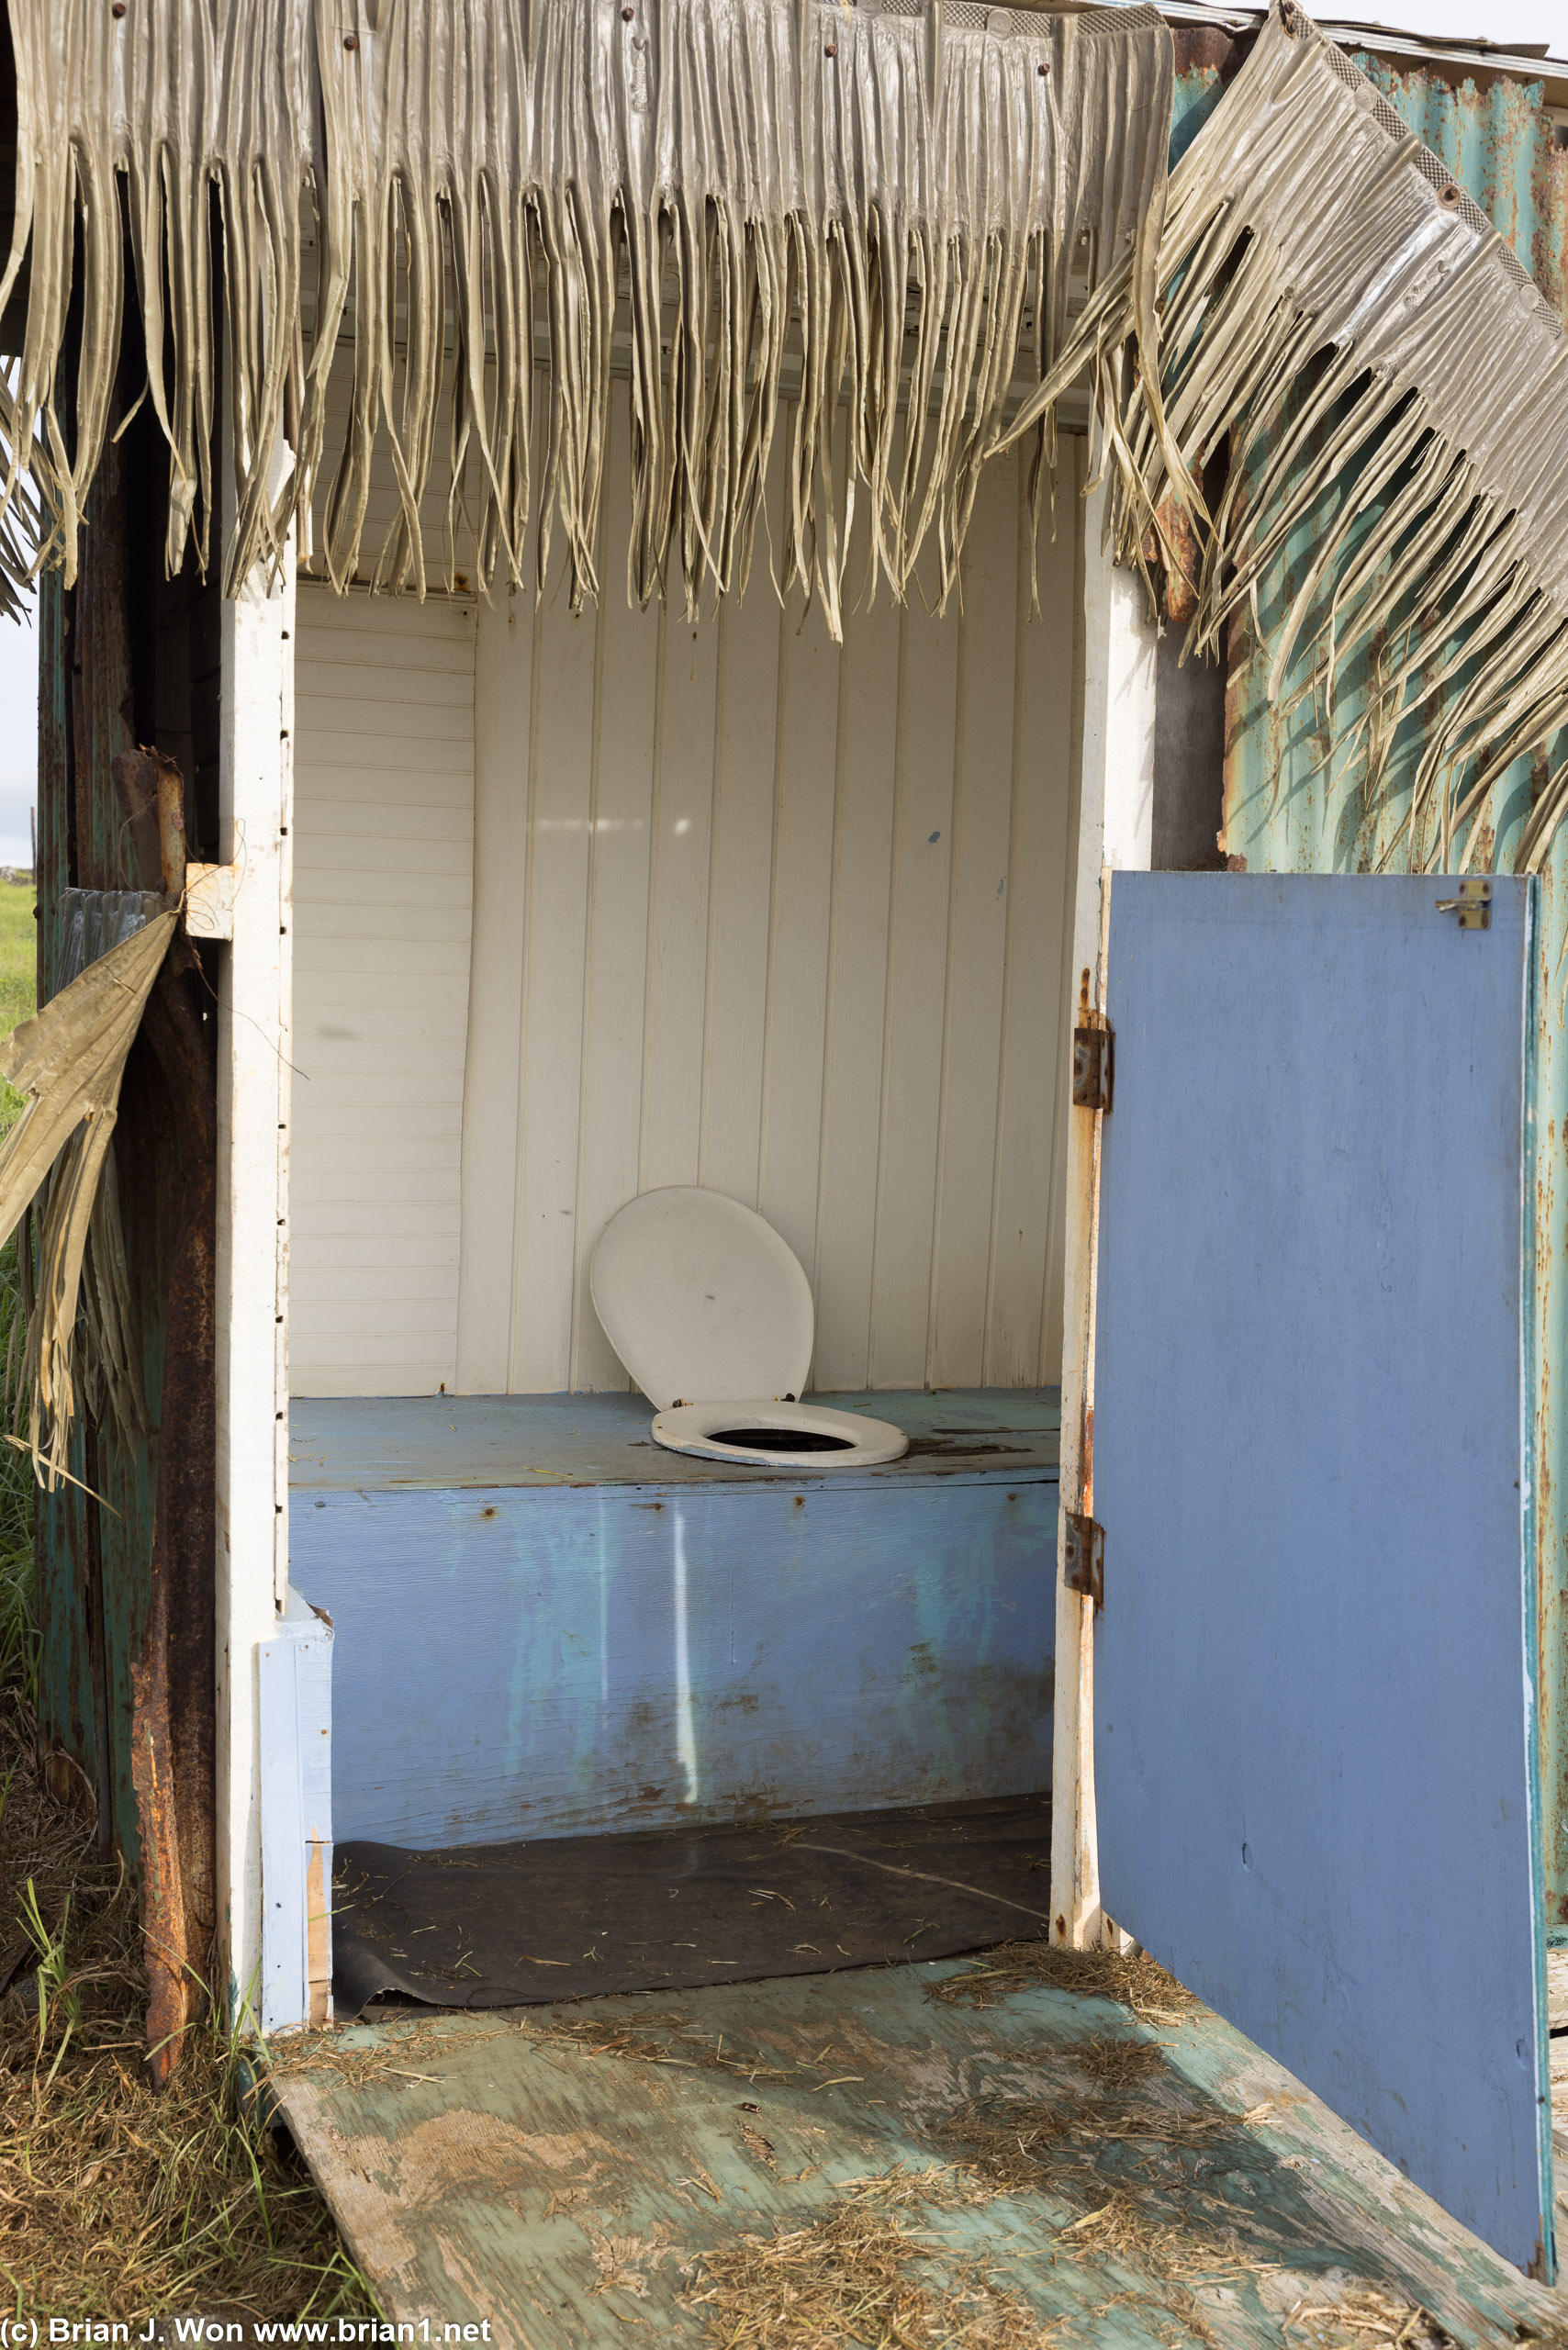 Perhaps the cleanest and least smelly outhouse you'll ever see.